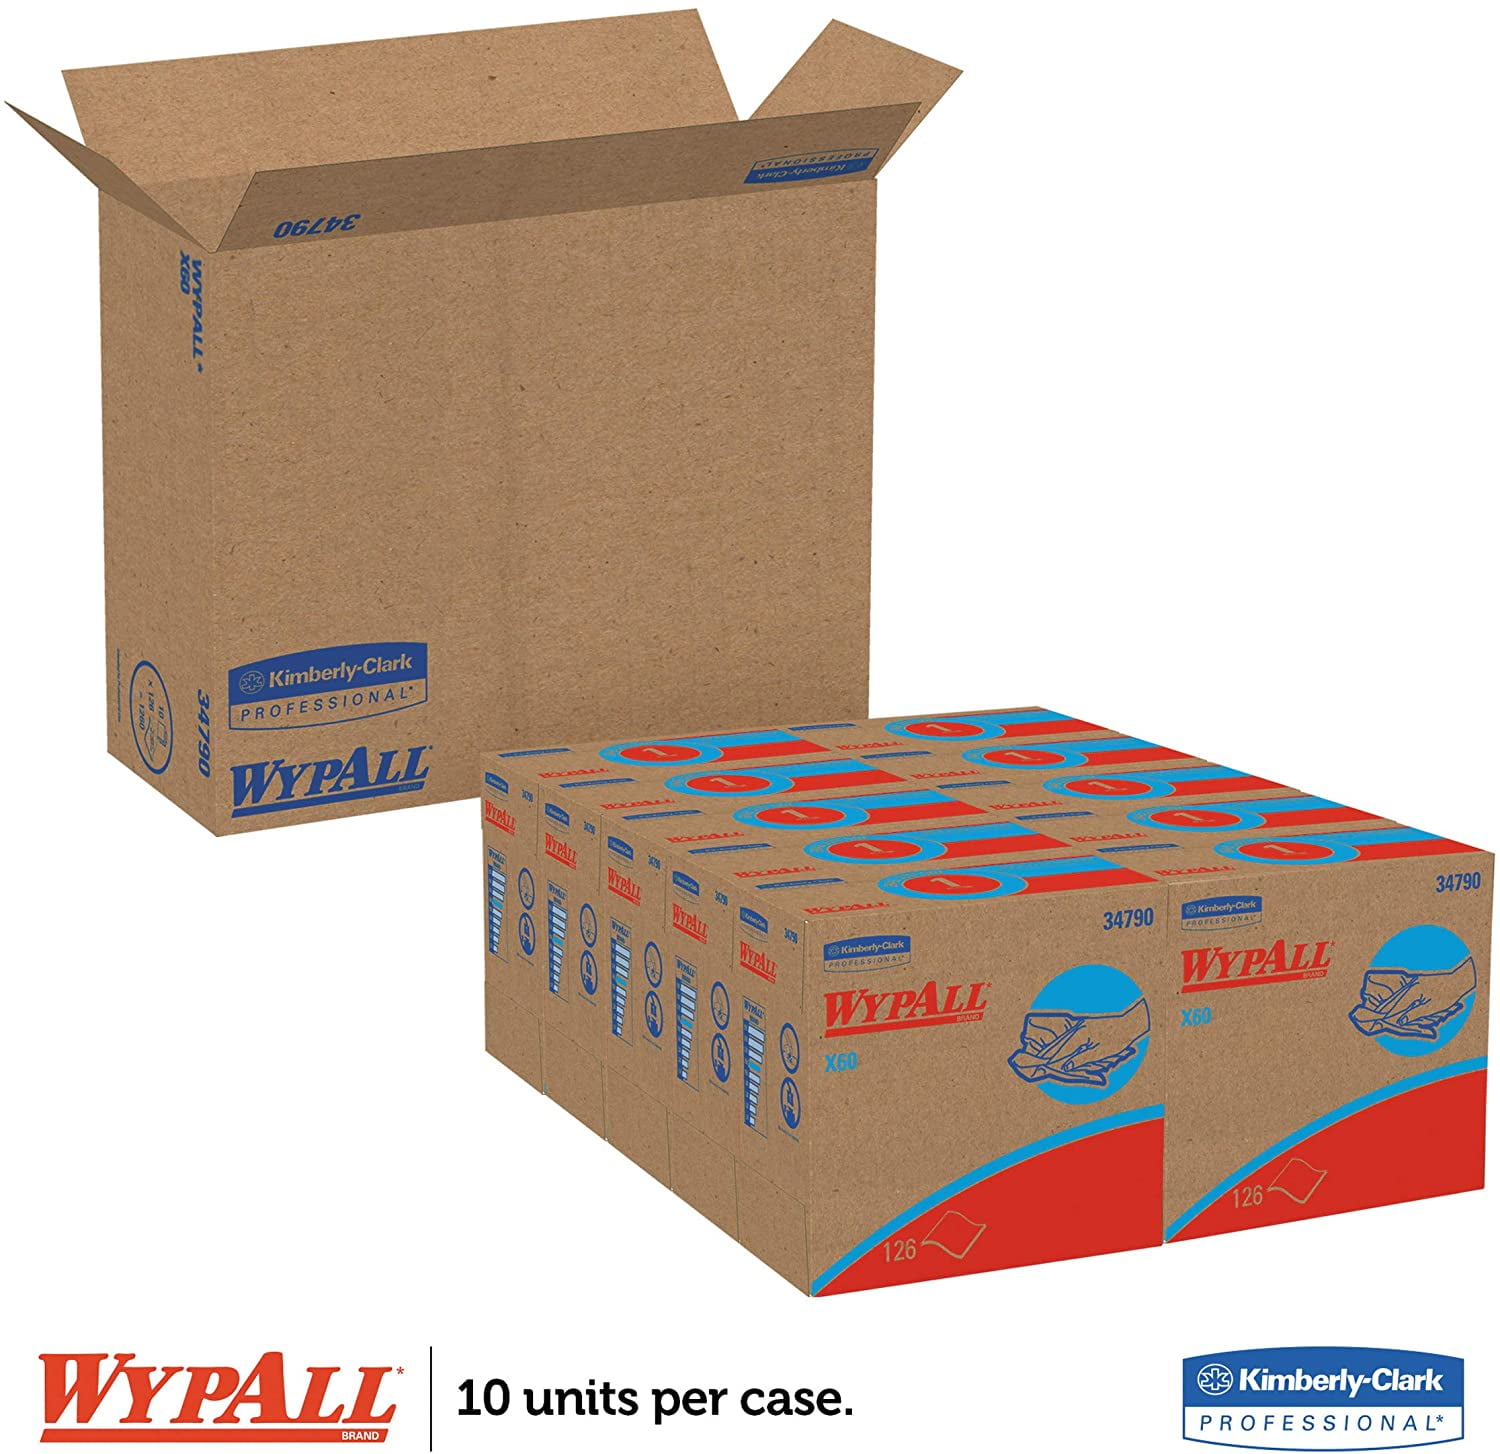 34790 Wypall X60 Reusable Cloths in Convenient Pop-Up Box, 126 Sheets-White 